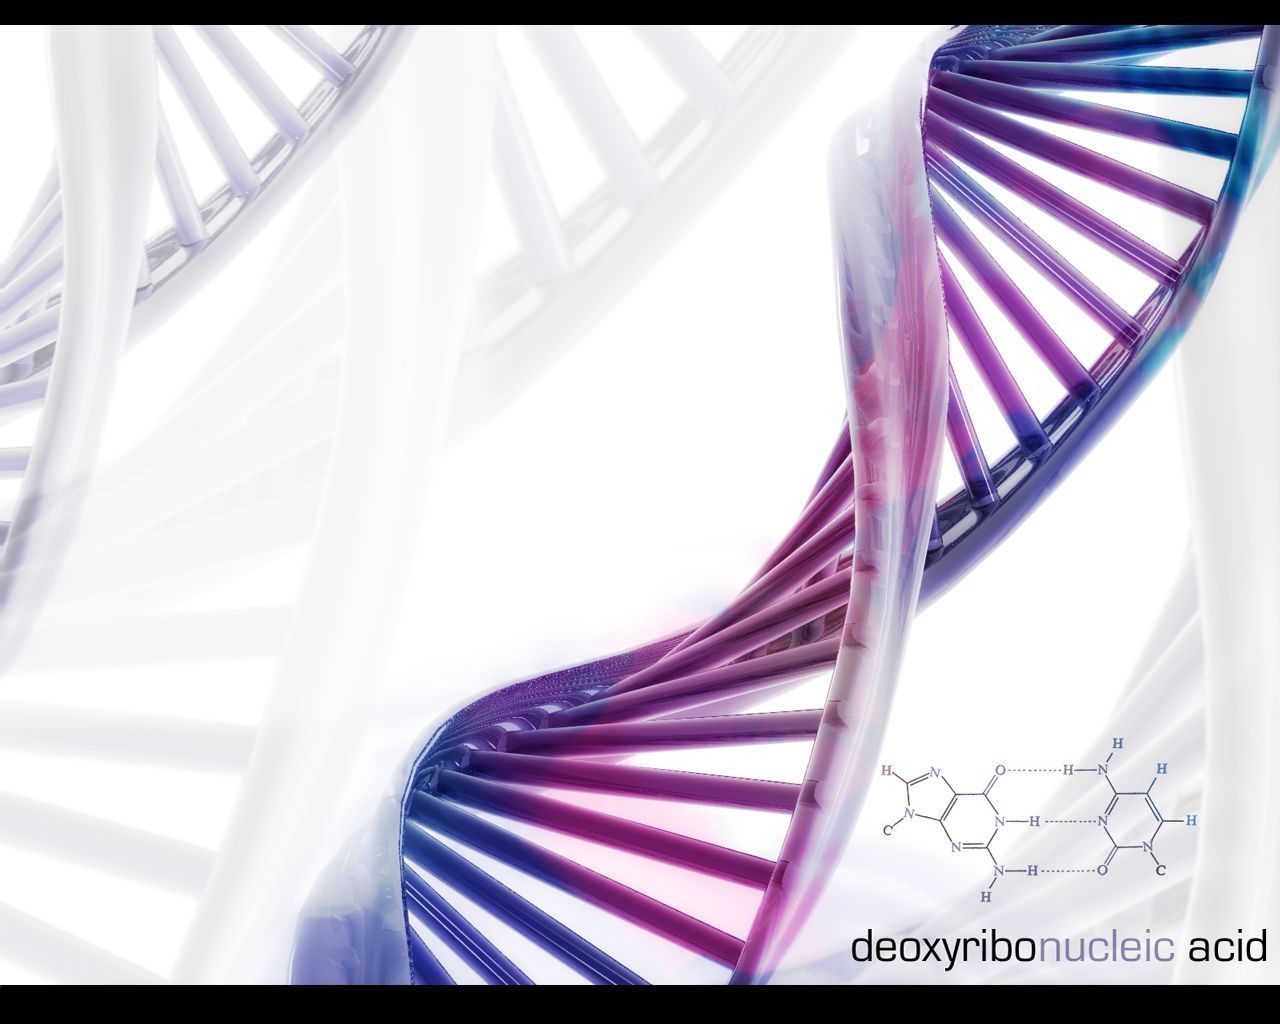 Download Dna Science Free Wallpaper 1280x1024 | Full HD Wallpapers